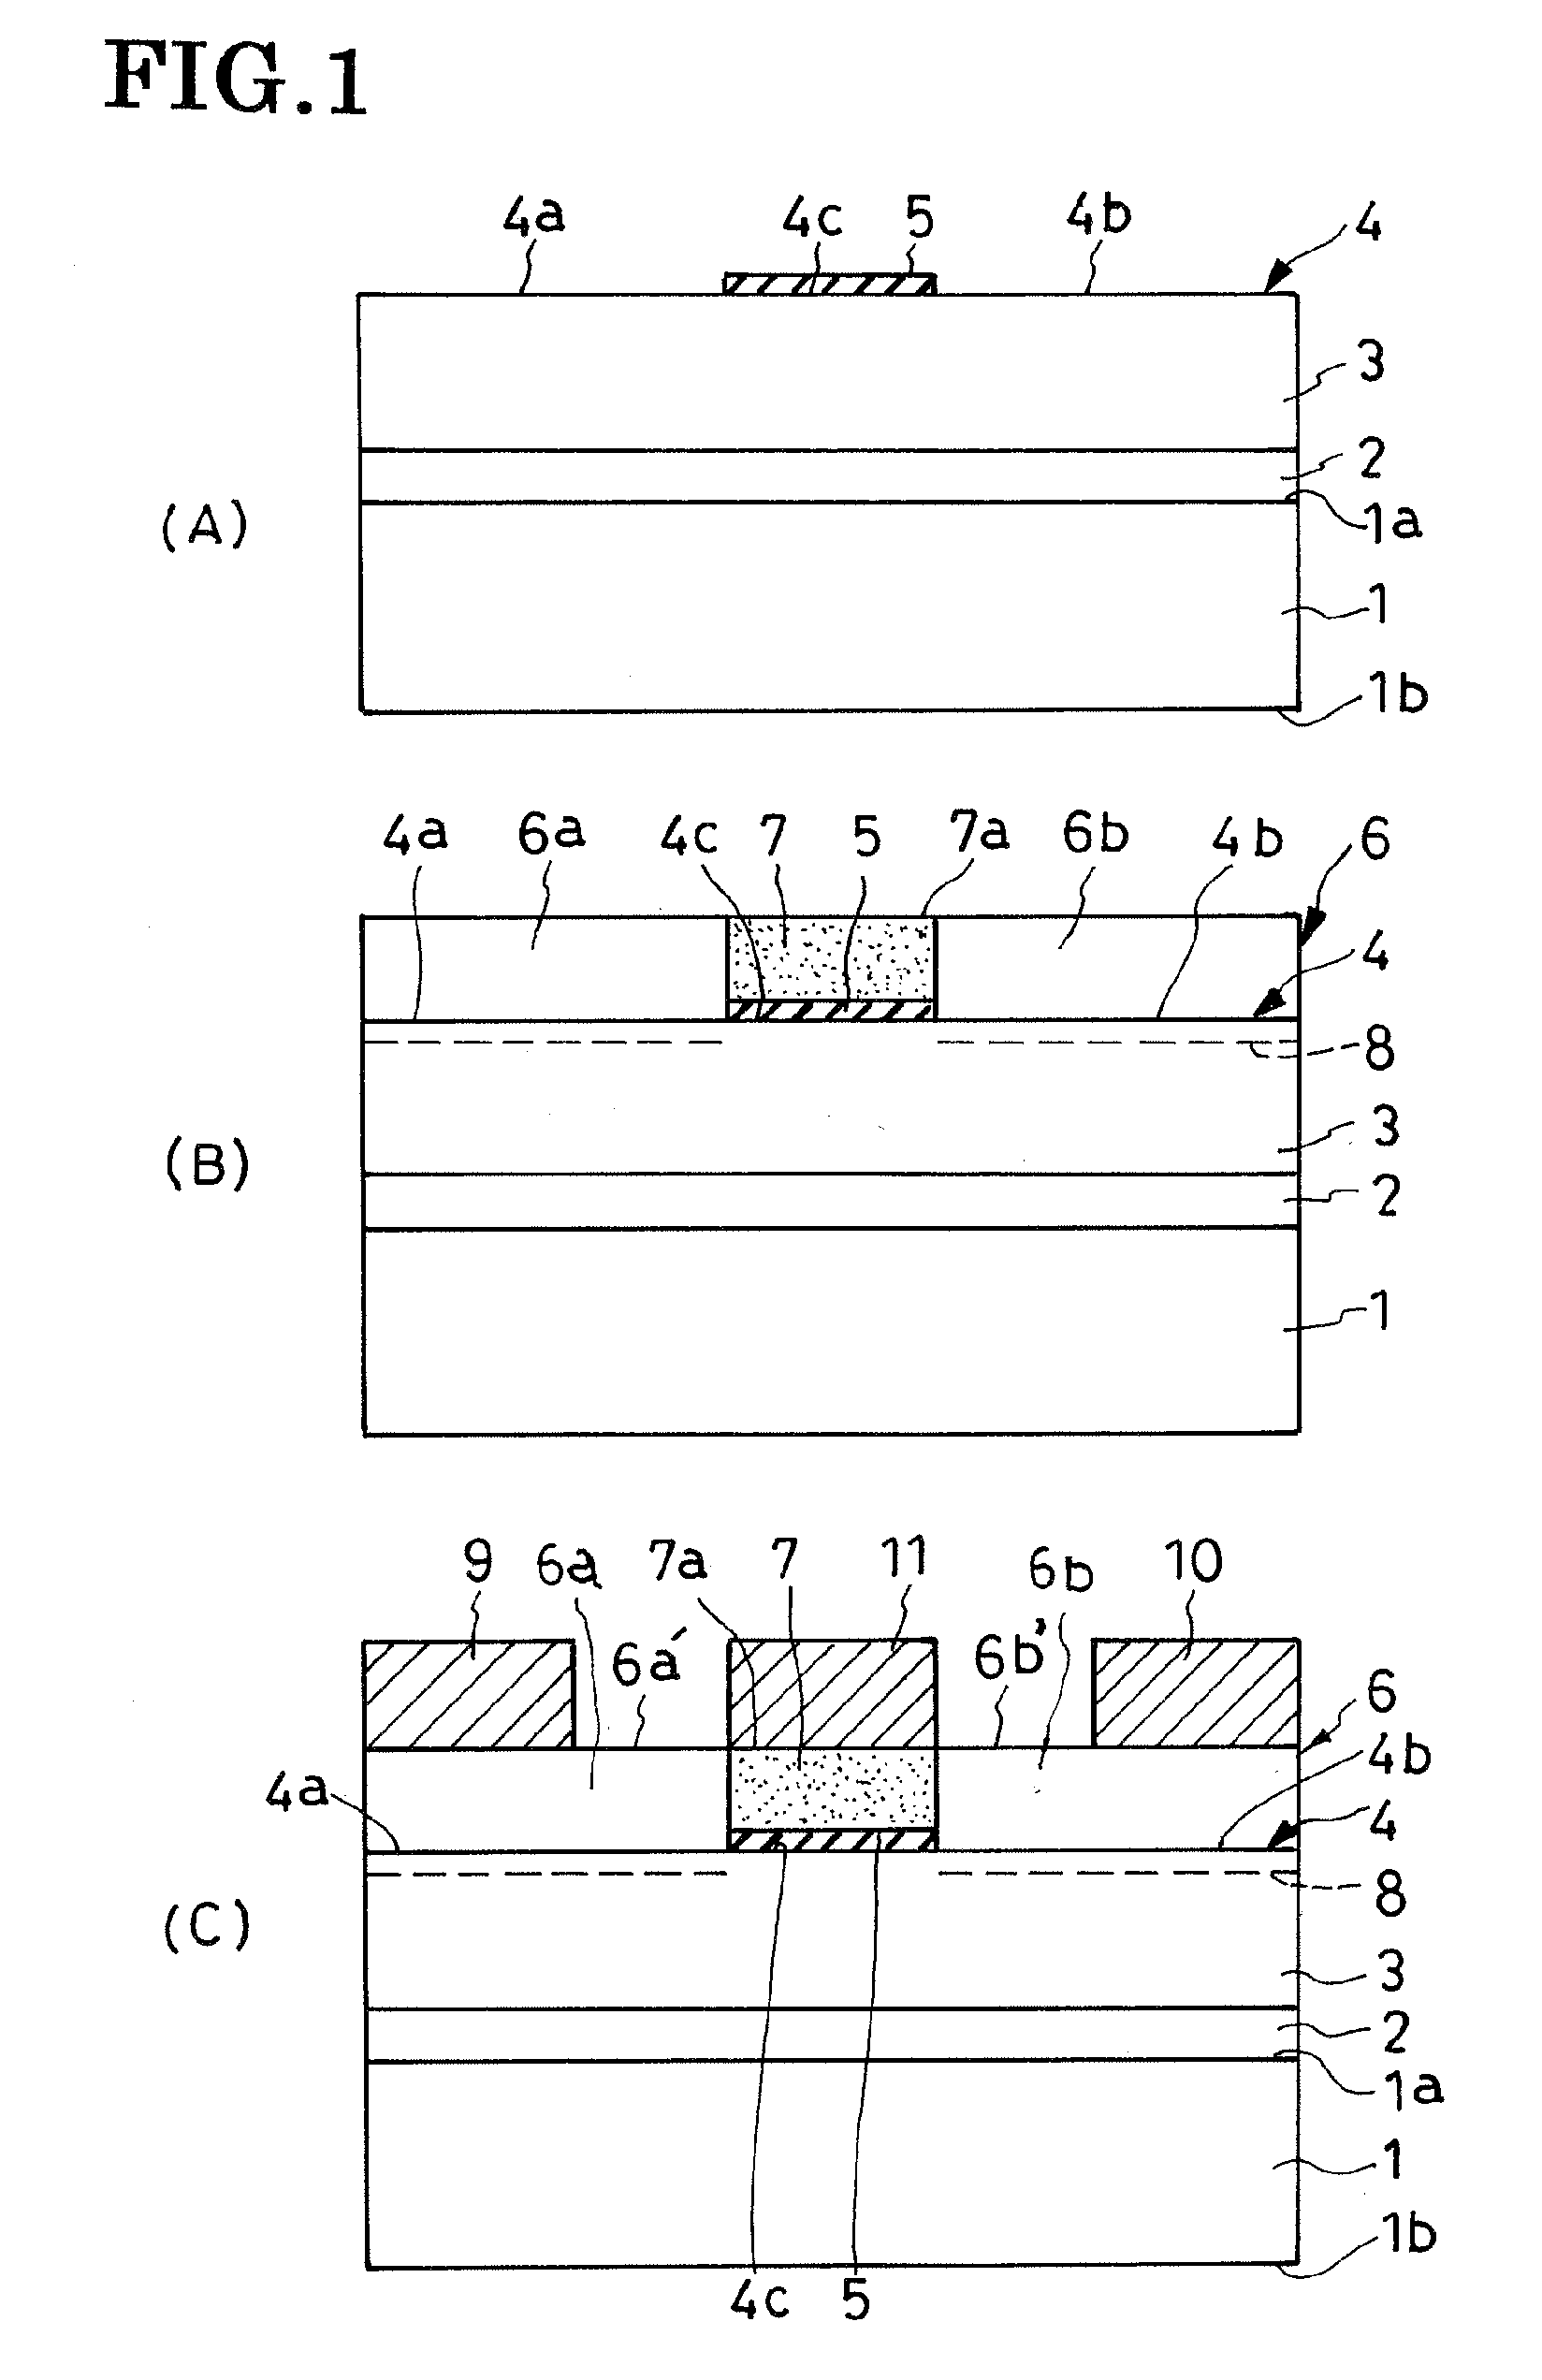 Field-effect semiconductor device and method of fabrication